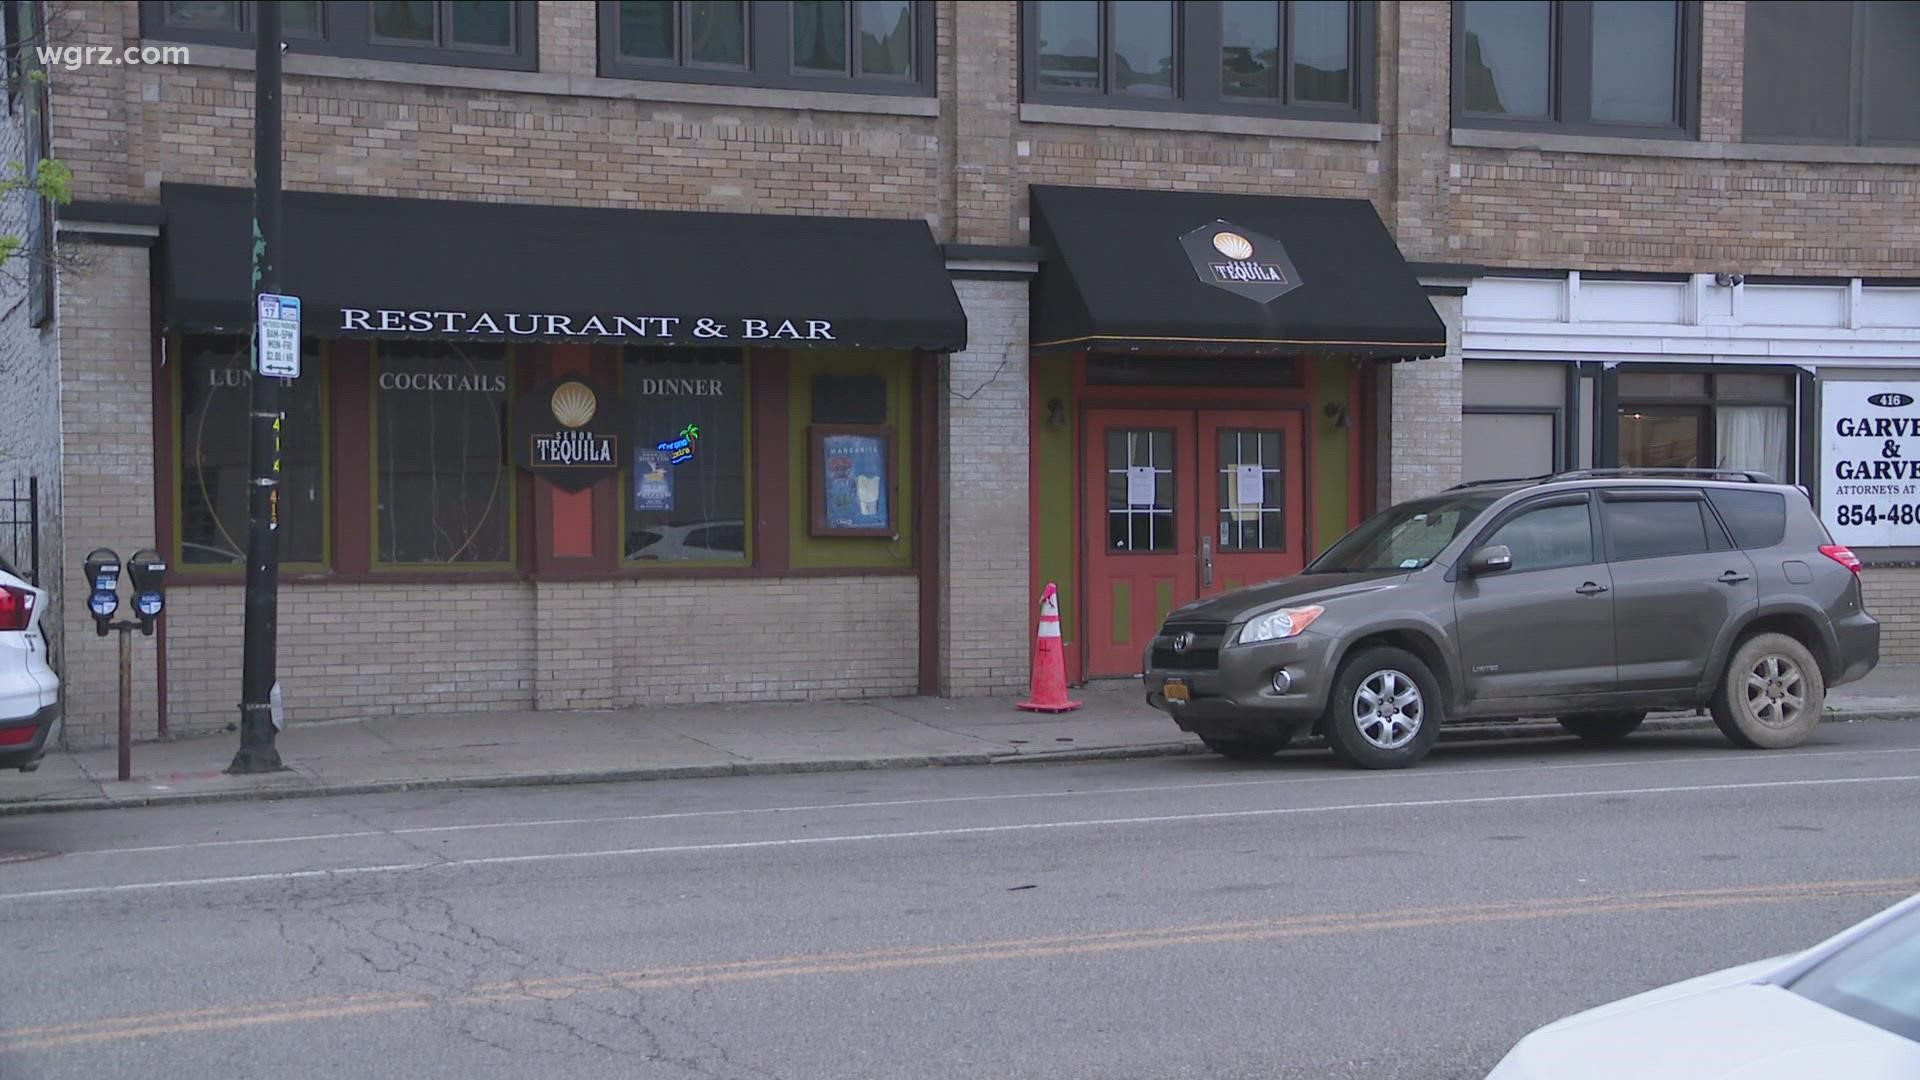 The Erie County DA's office says three people are facing charges after a shooting that hurt two people outside a business on Pearl Street over the weekend.